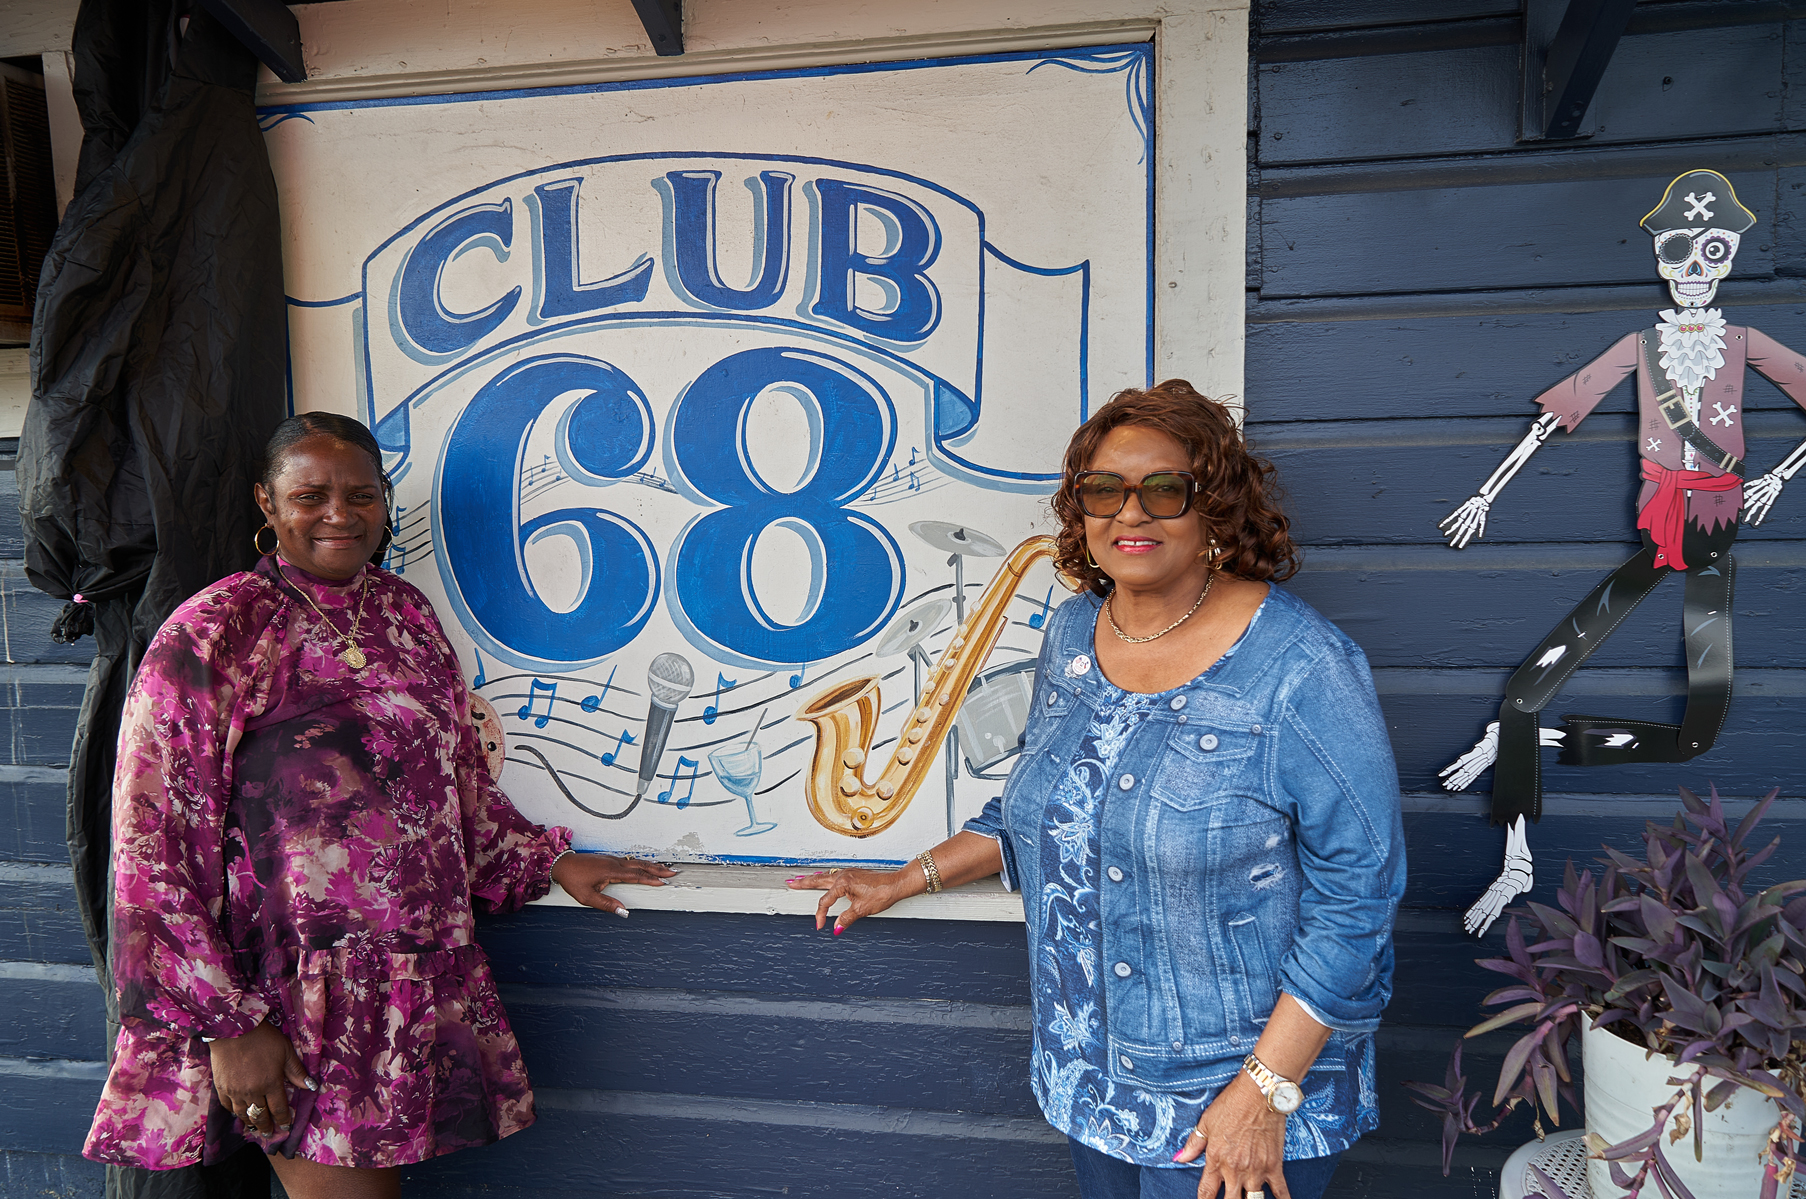 The Miller Commercial owner Rosalyn Jackson, left, and Club 68 manager Lilian McGrew, right, pose outside the Miller Commercial building